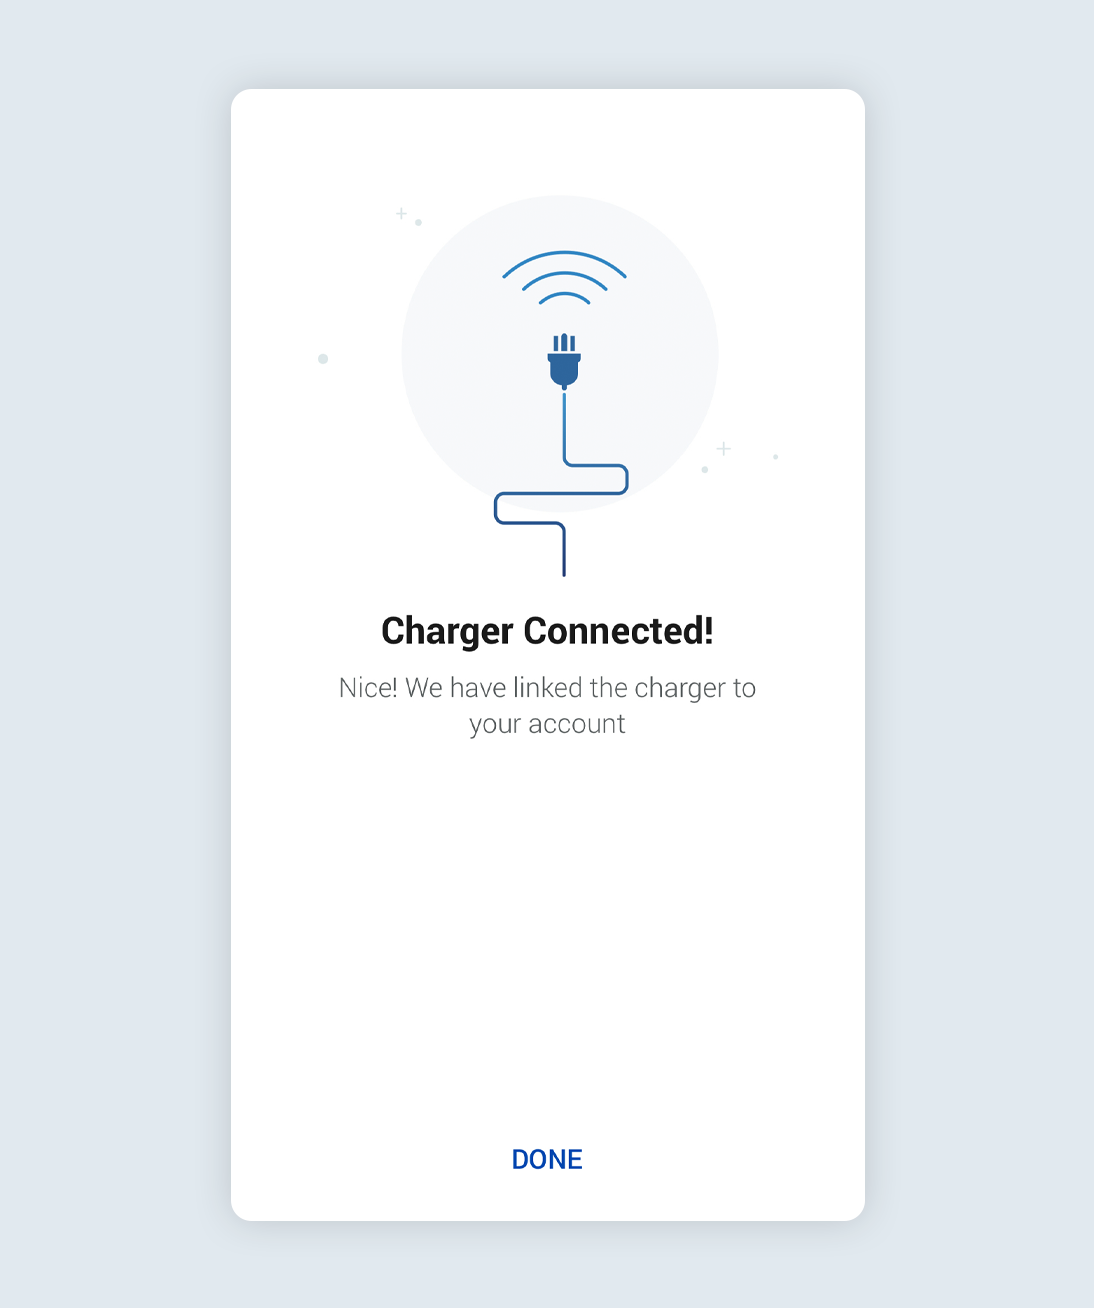 App screen showing charger successfully connected